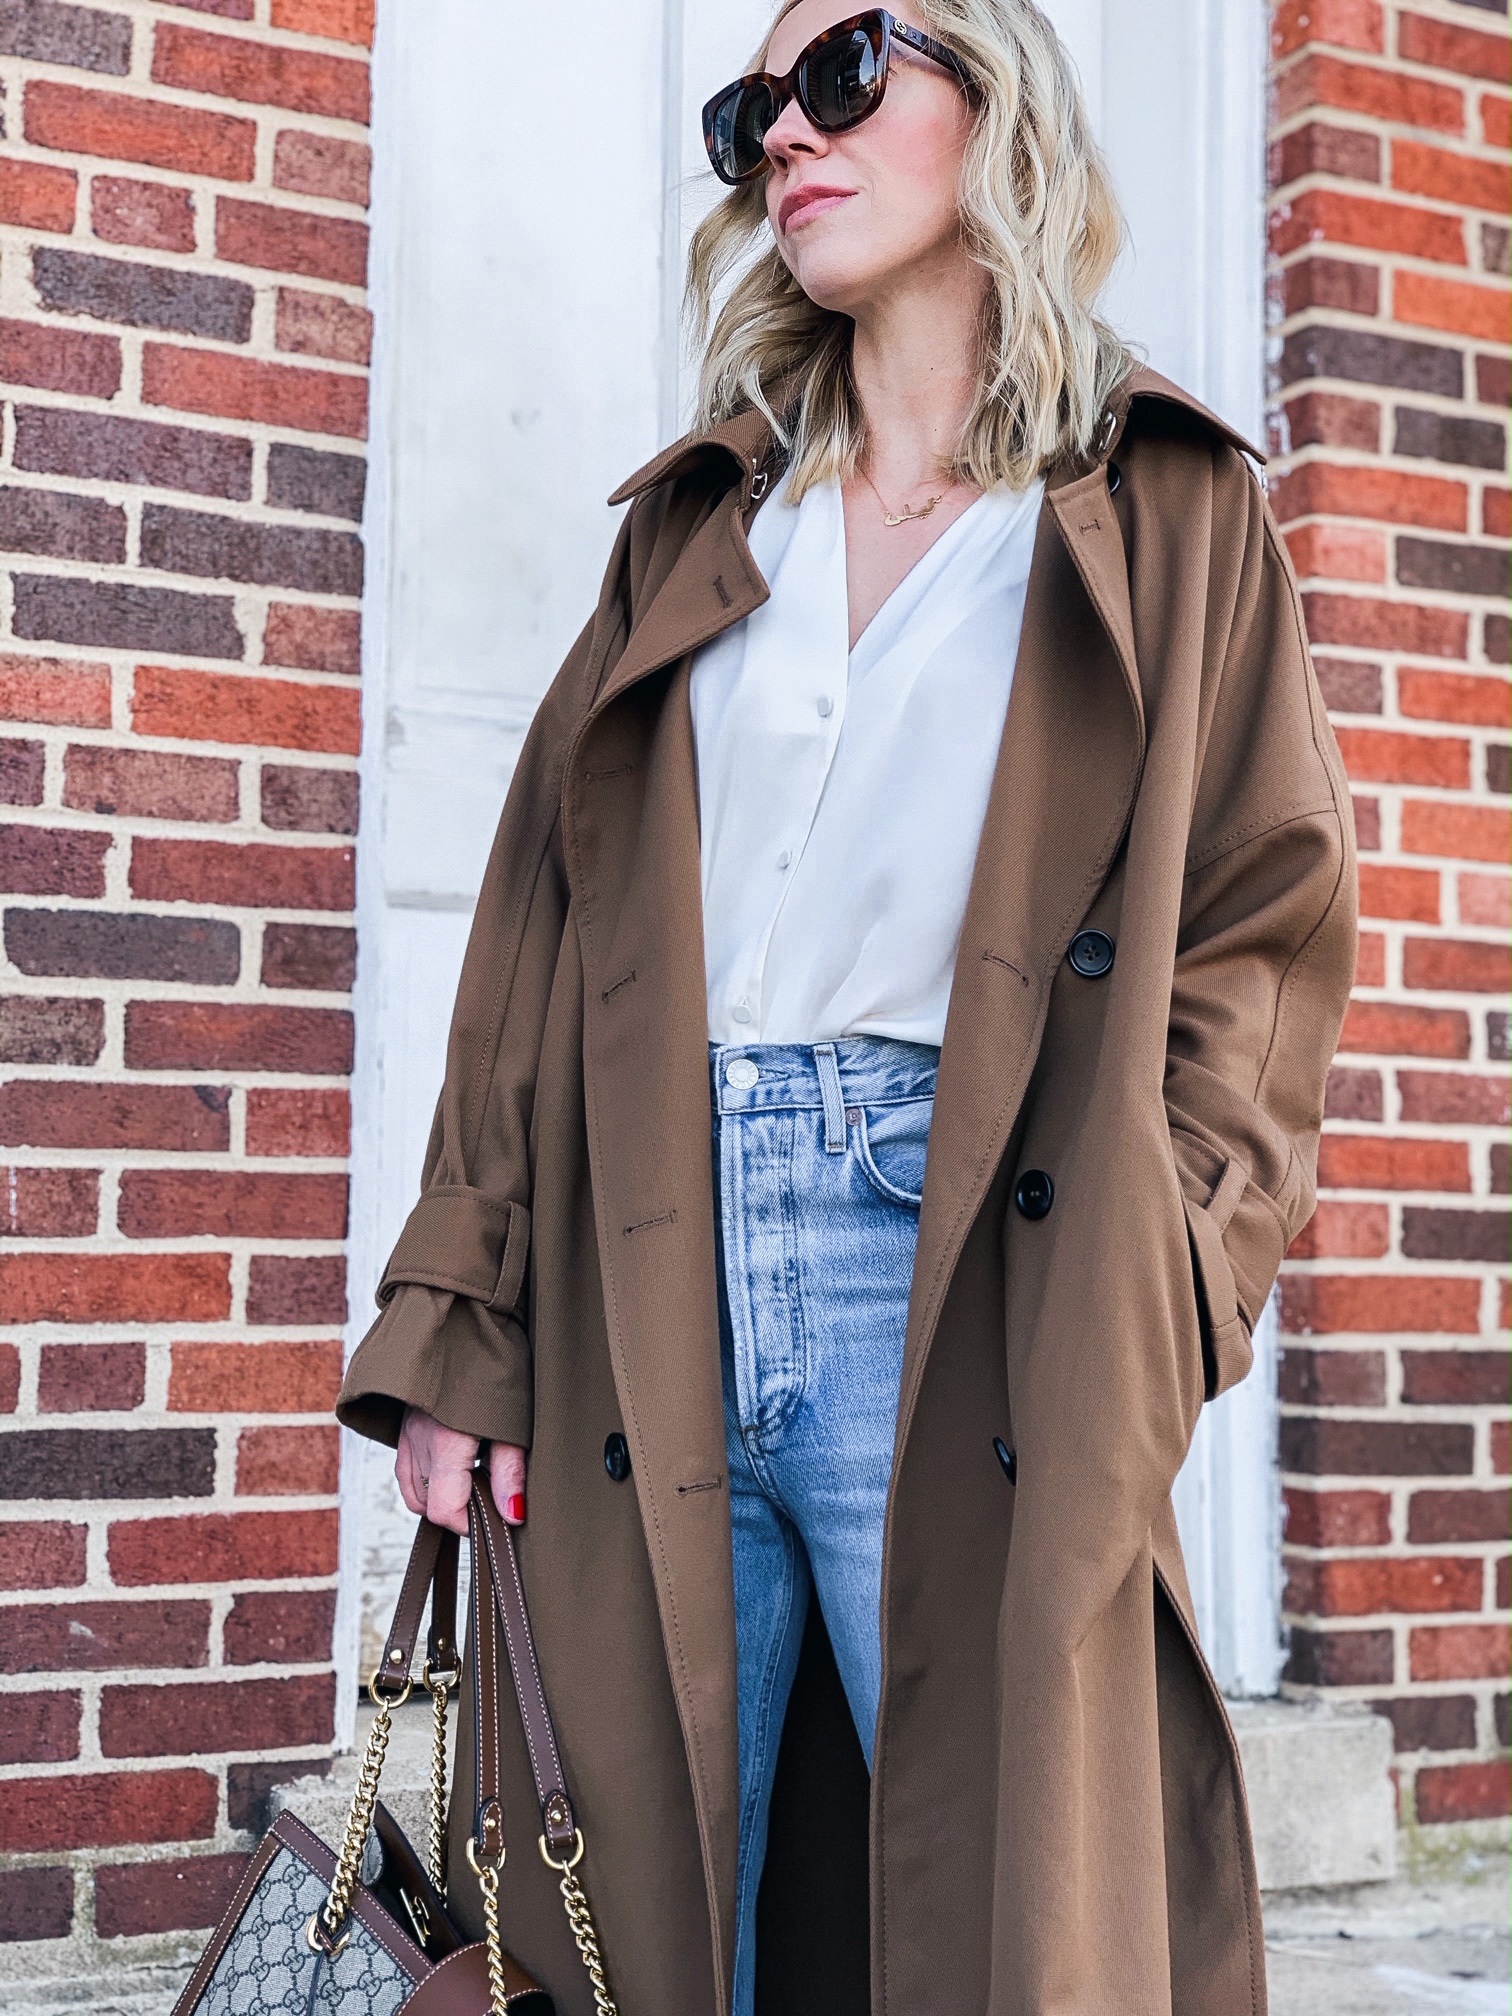 The Trench Coat Color That's Trending This Spring - Meagan's Moda